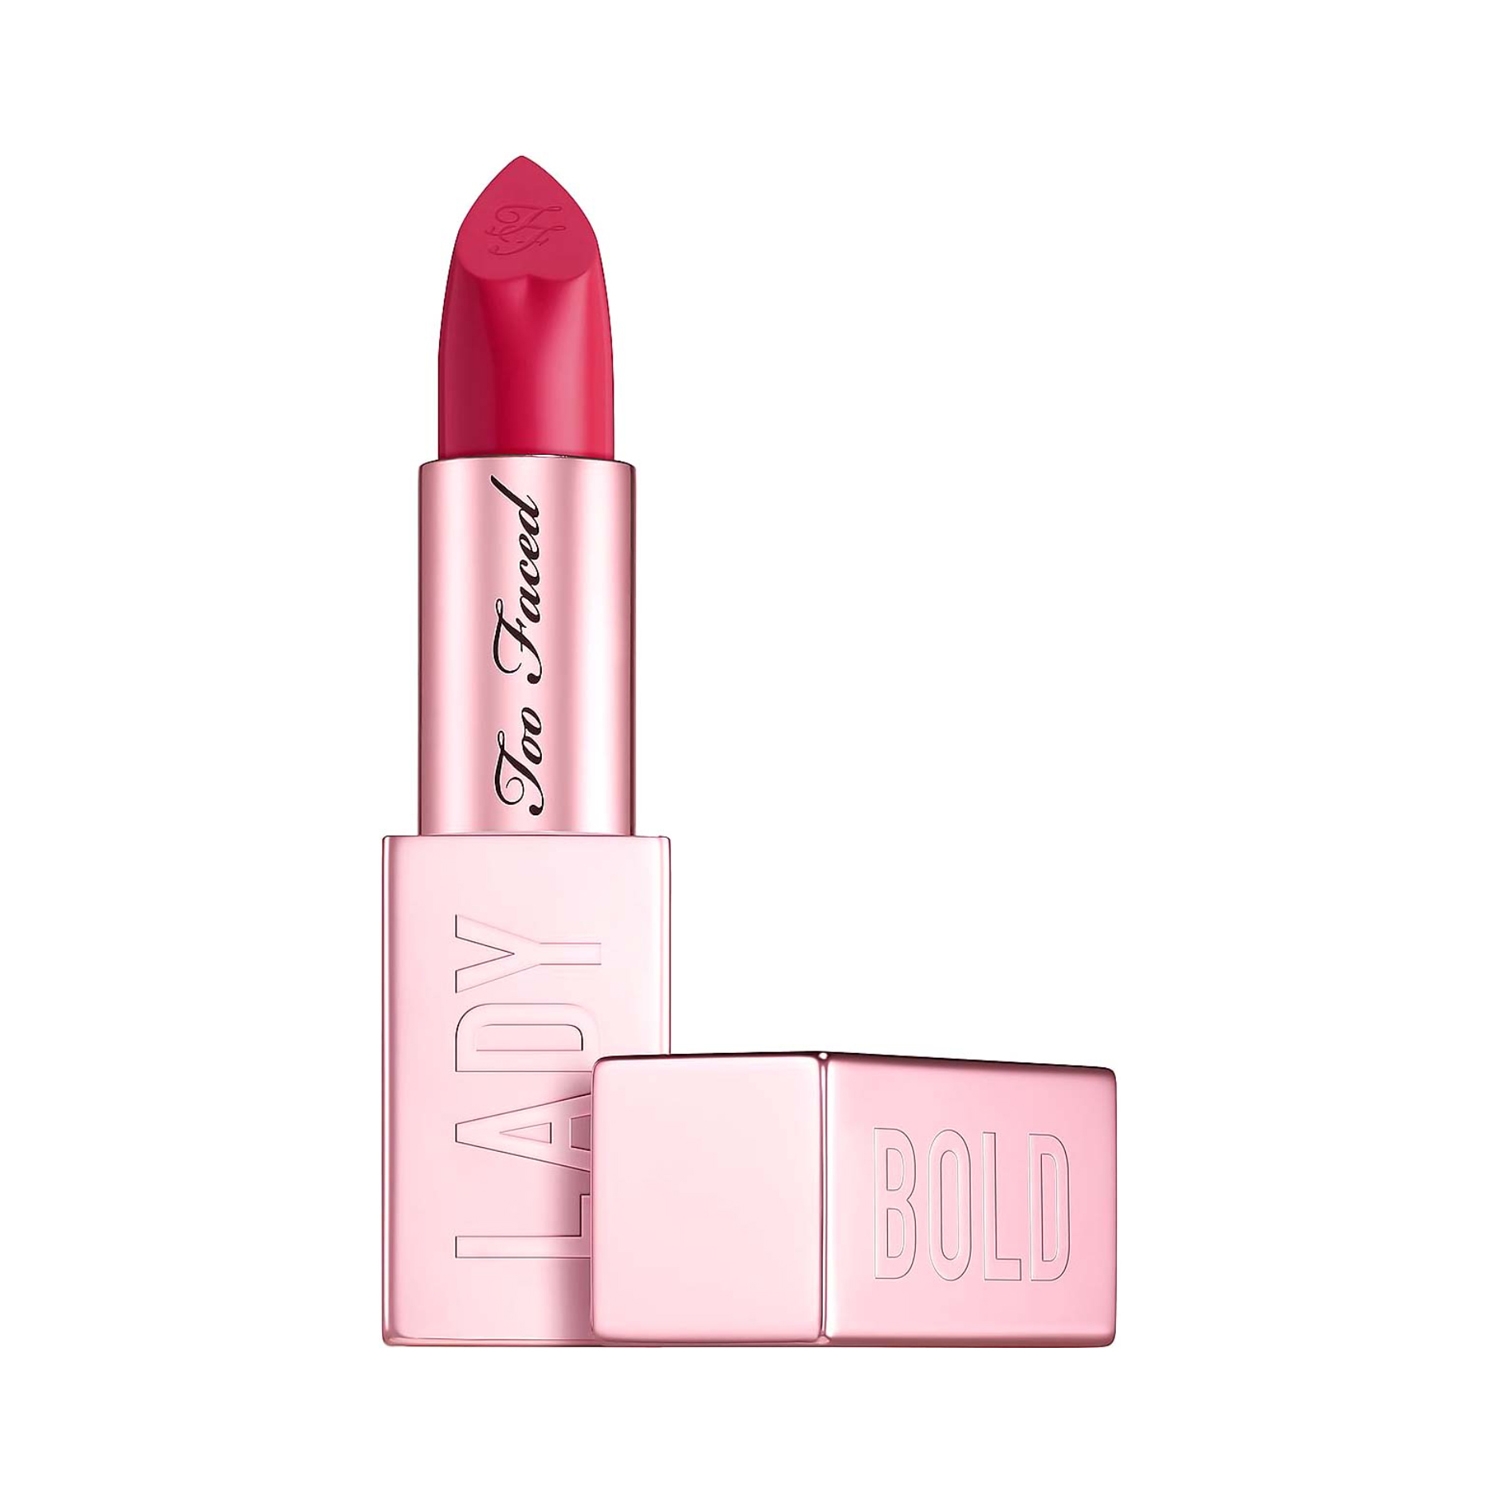 Too Faced | Too Faced Lady Bold Cream Lipstick - Rebel (4g)